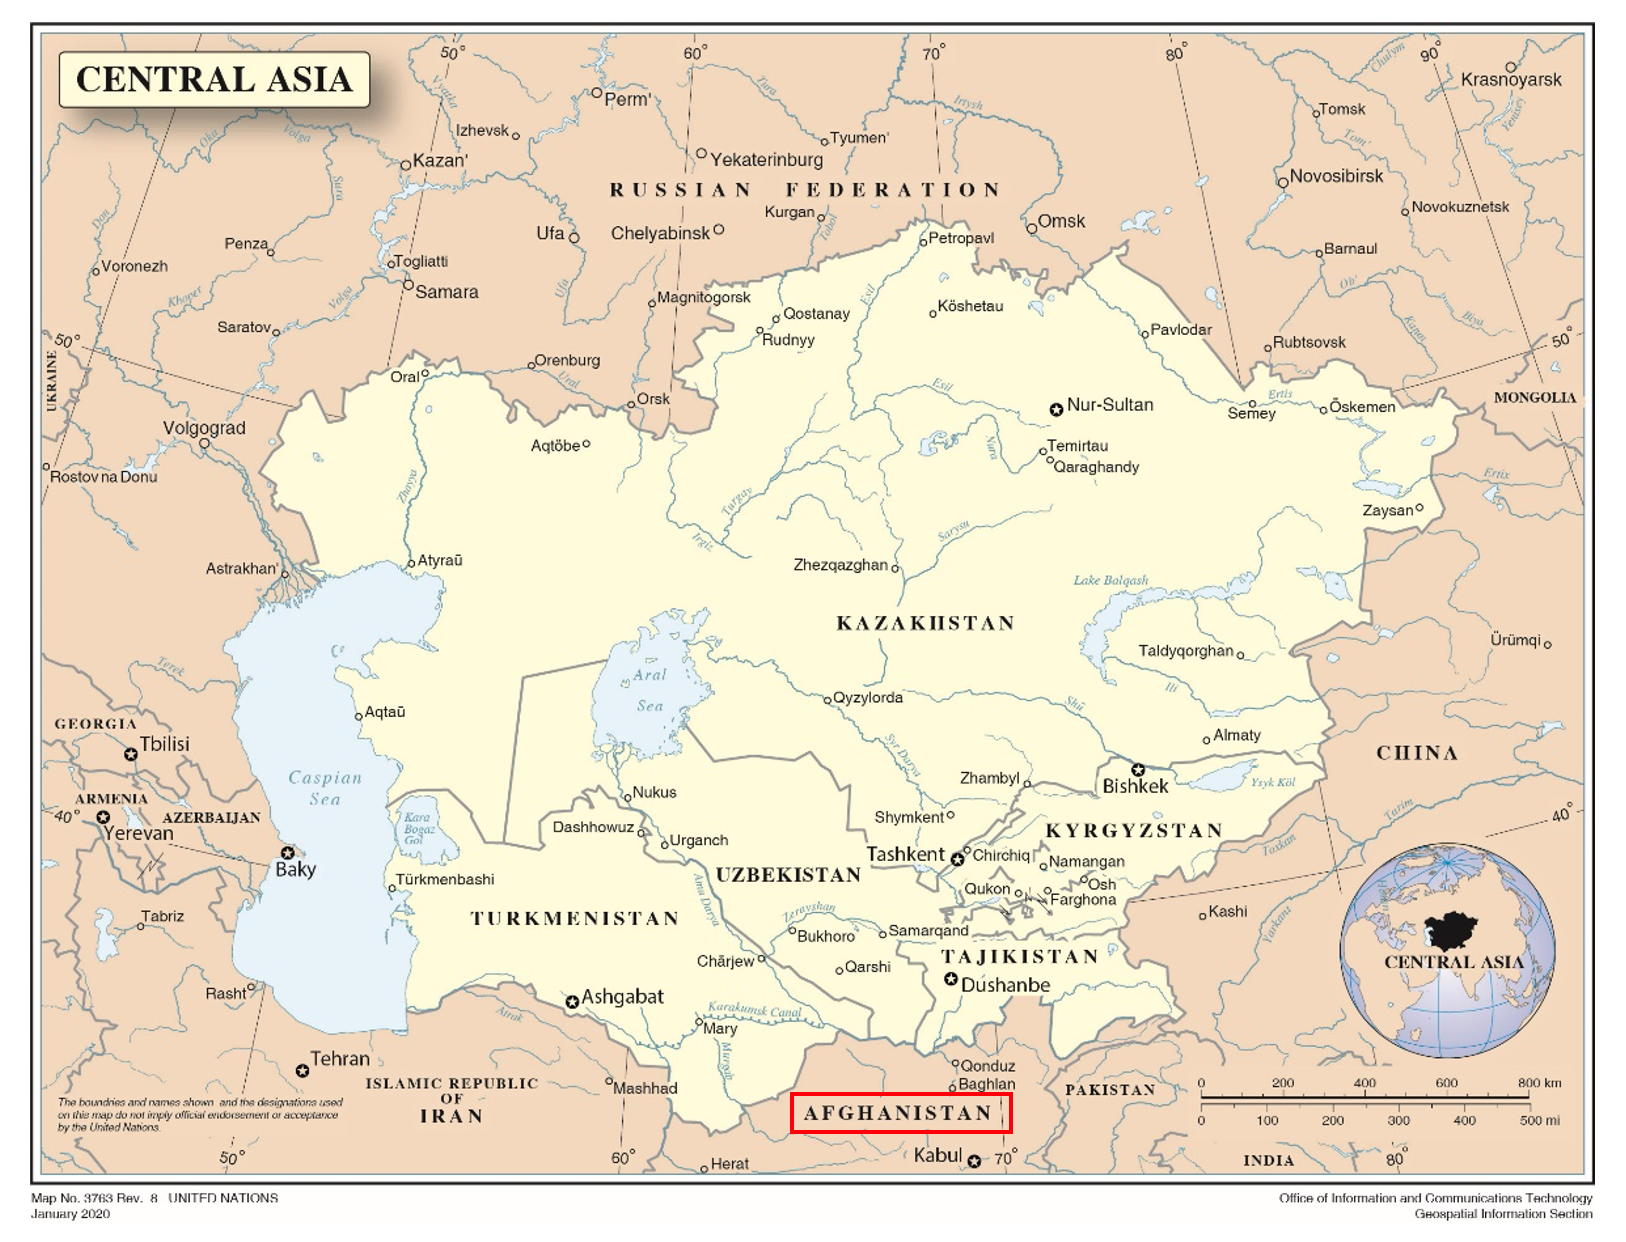 Figure 1. Map of Central Asia